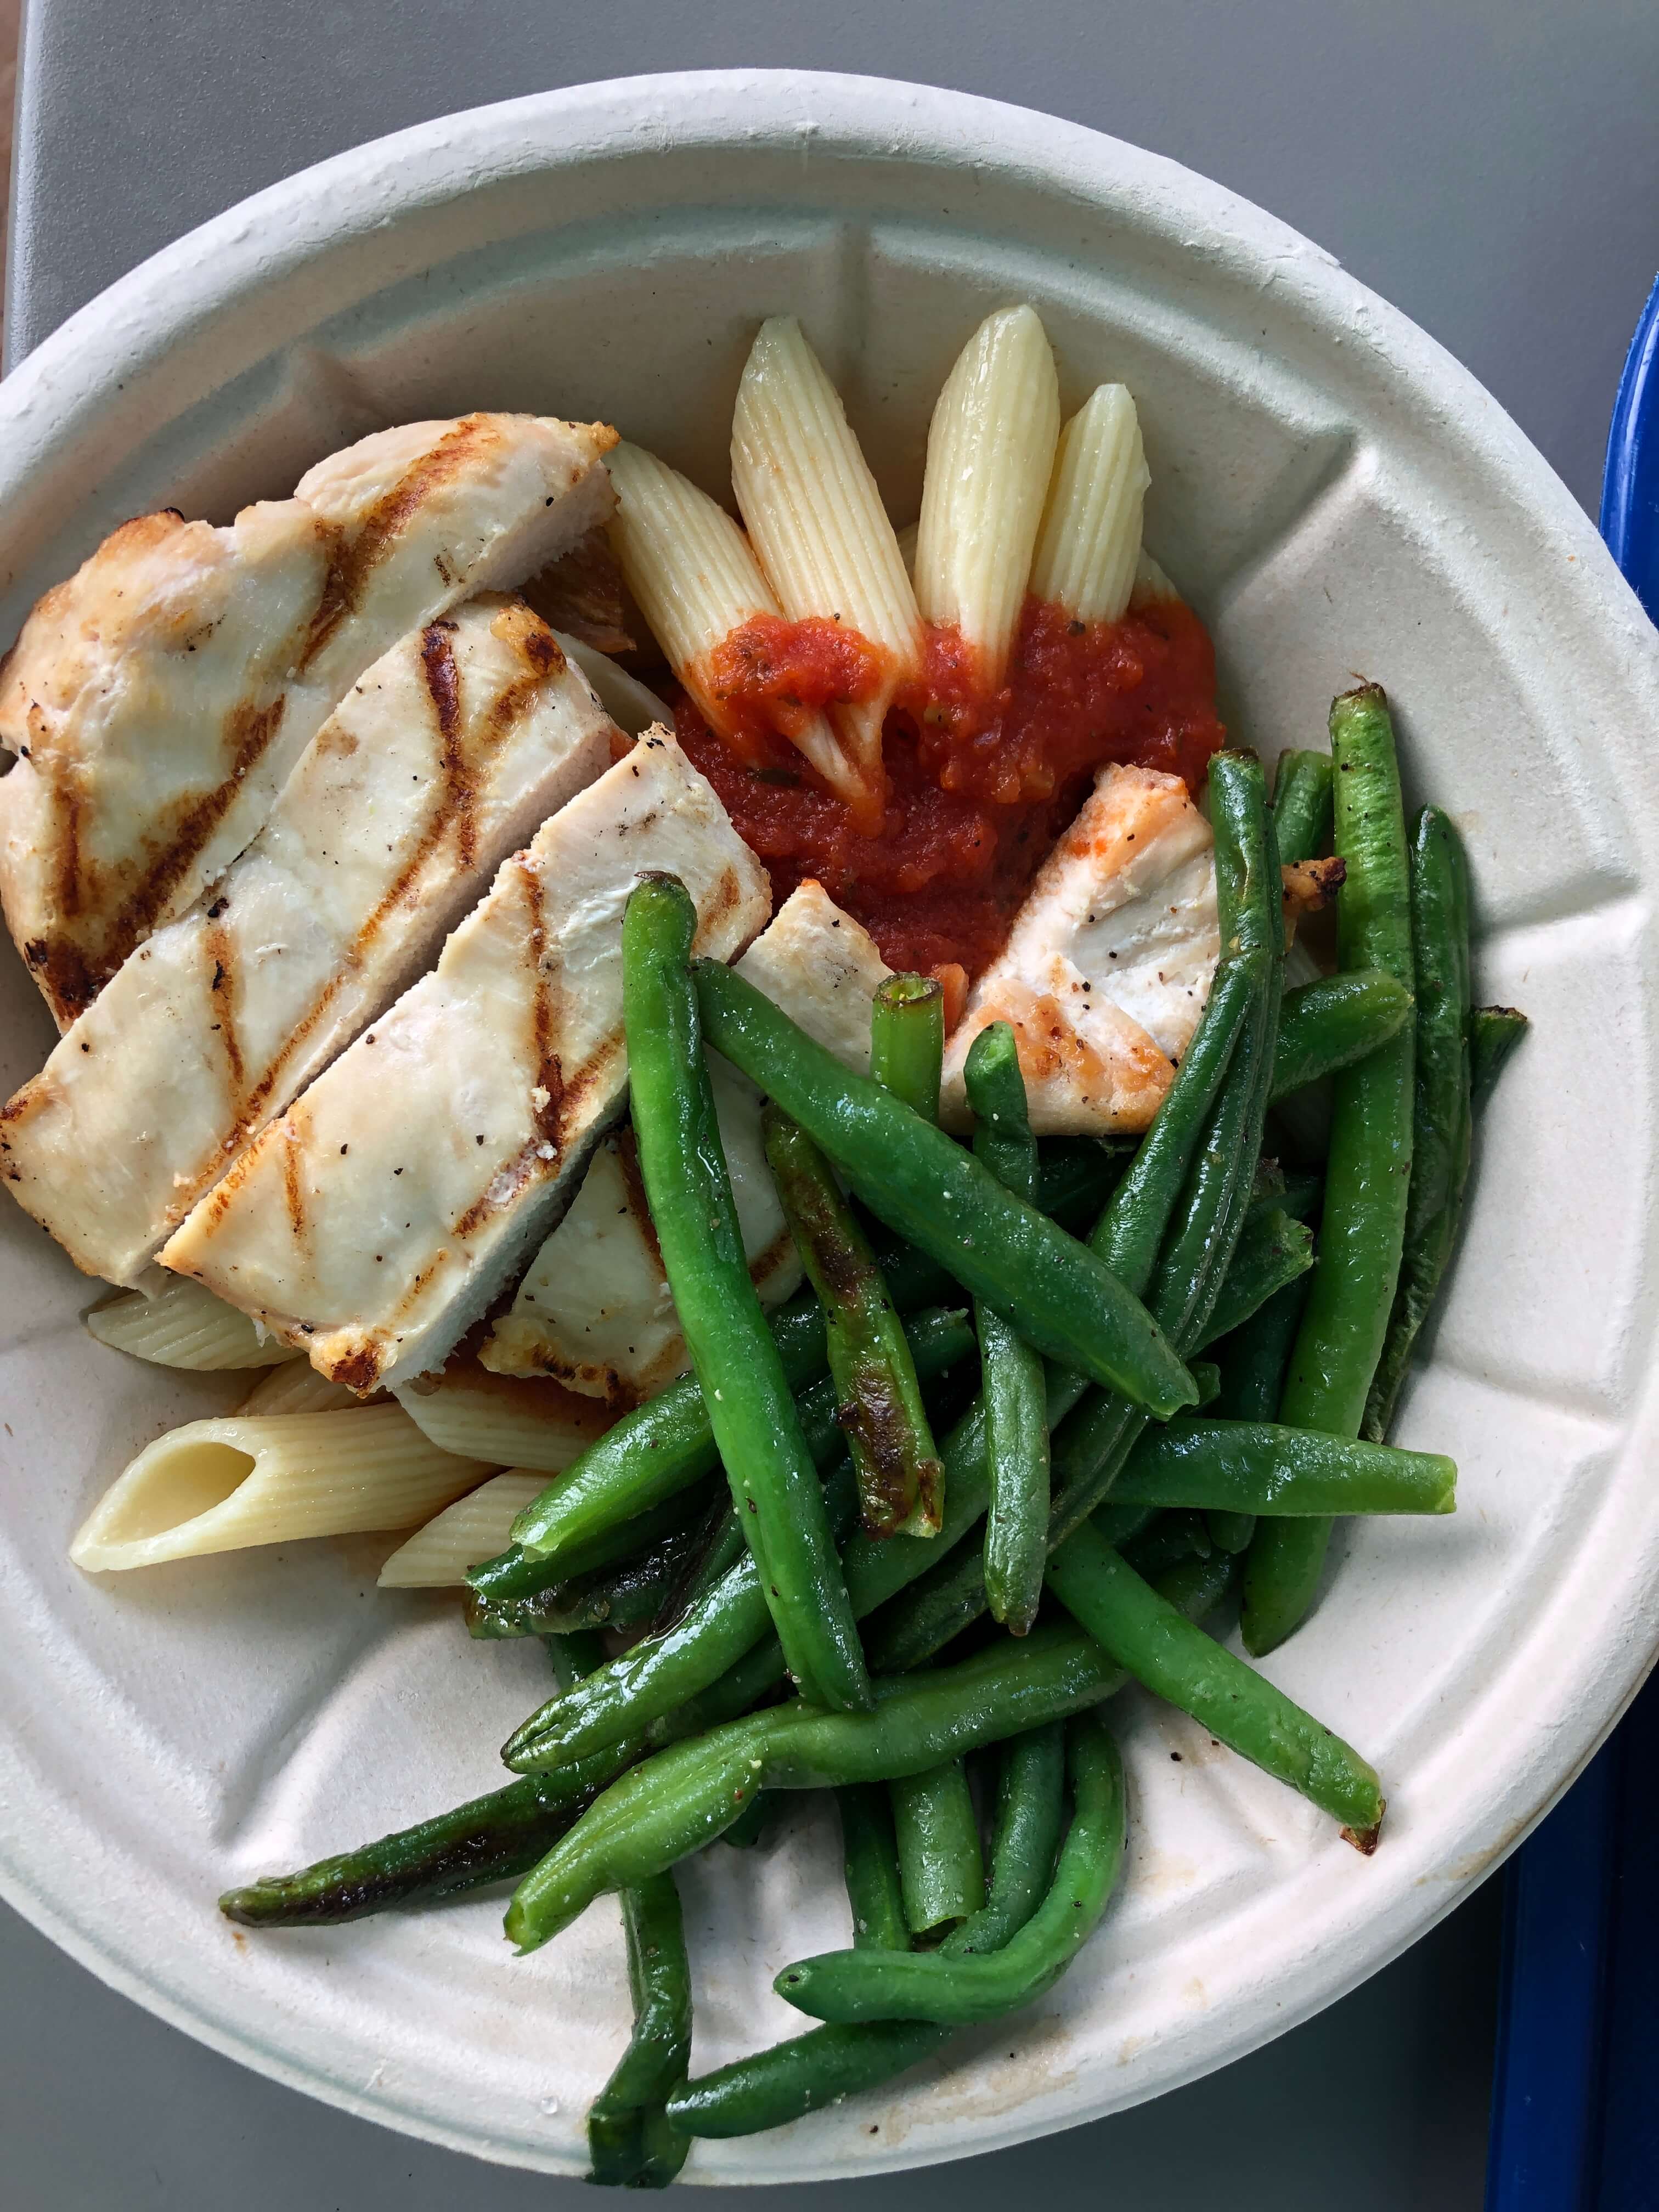 a close-up view of a kids meal featuring grilled chicken, green beans, and pasta with marinara